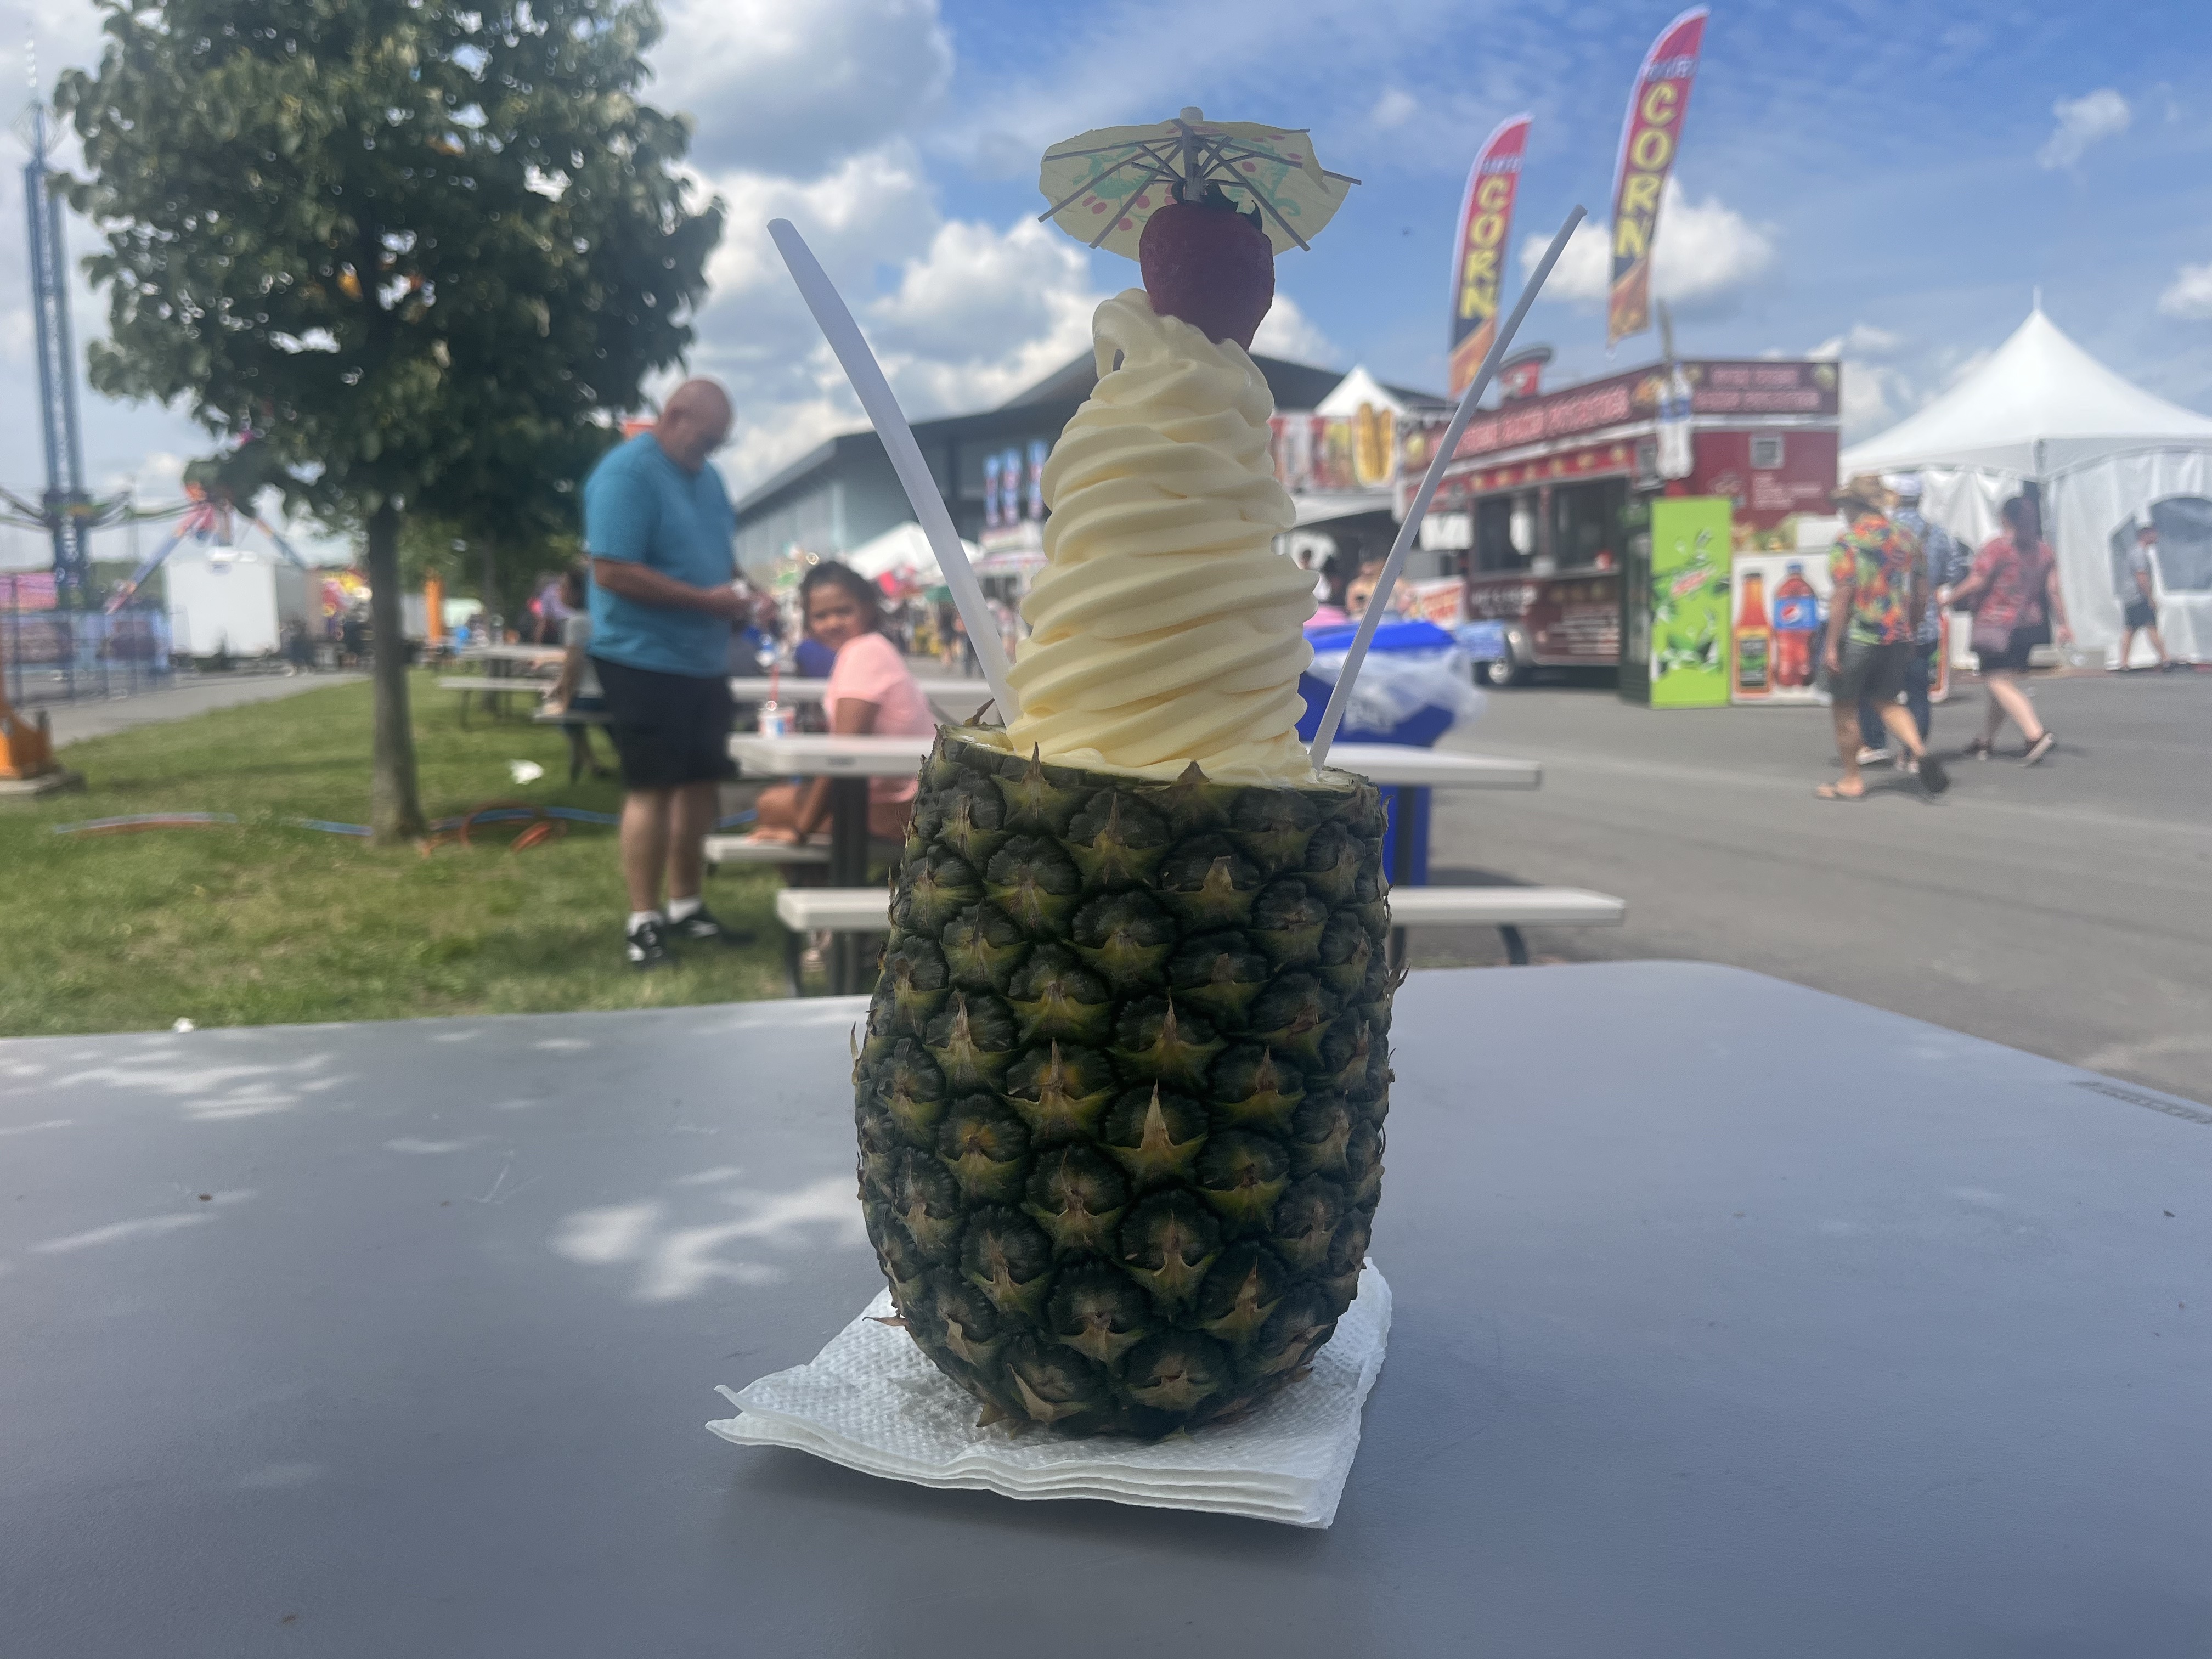 Dole Whip, piled into a scooped-out pineapple, is an eye-catching treat available at Tropical Delights at the NYS Fair.